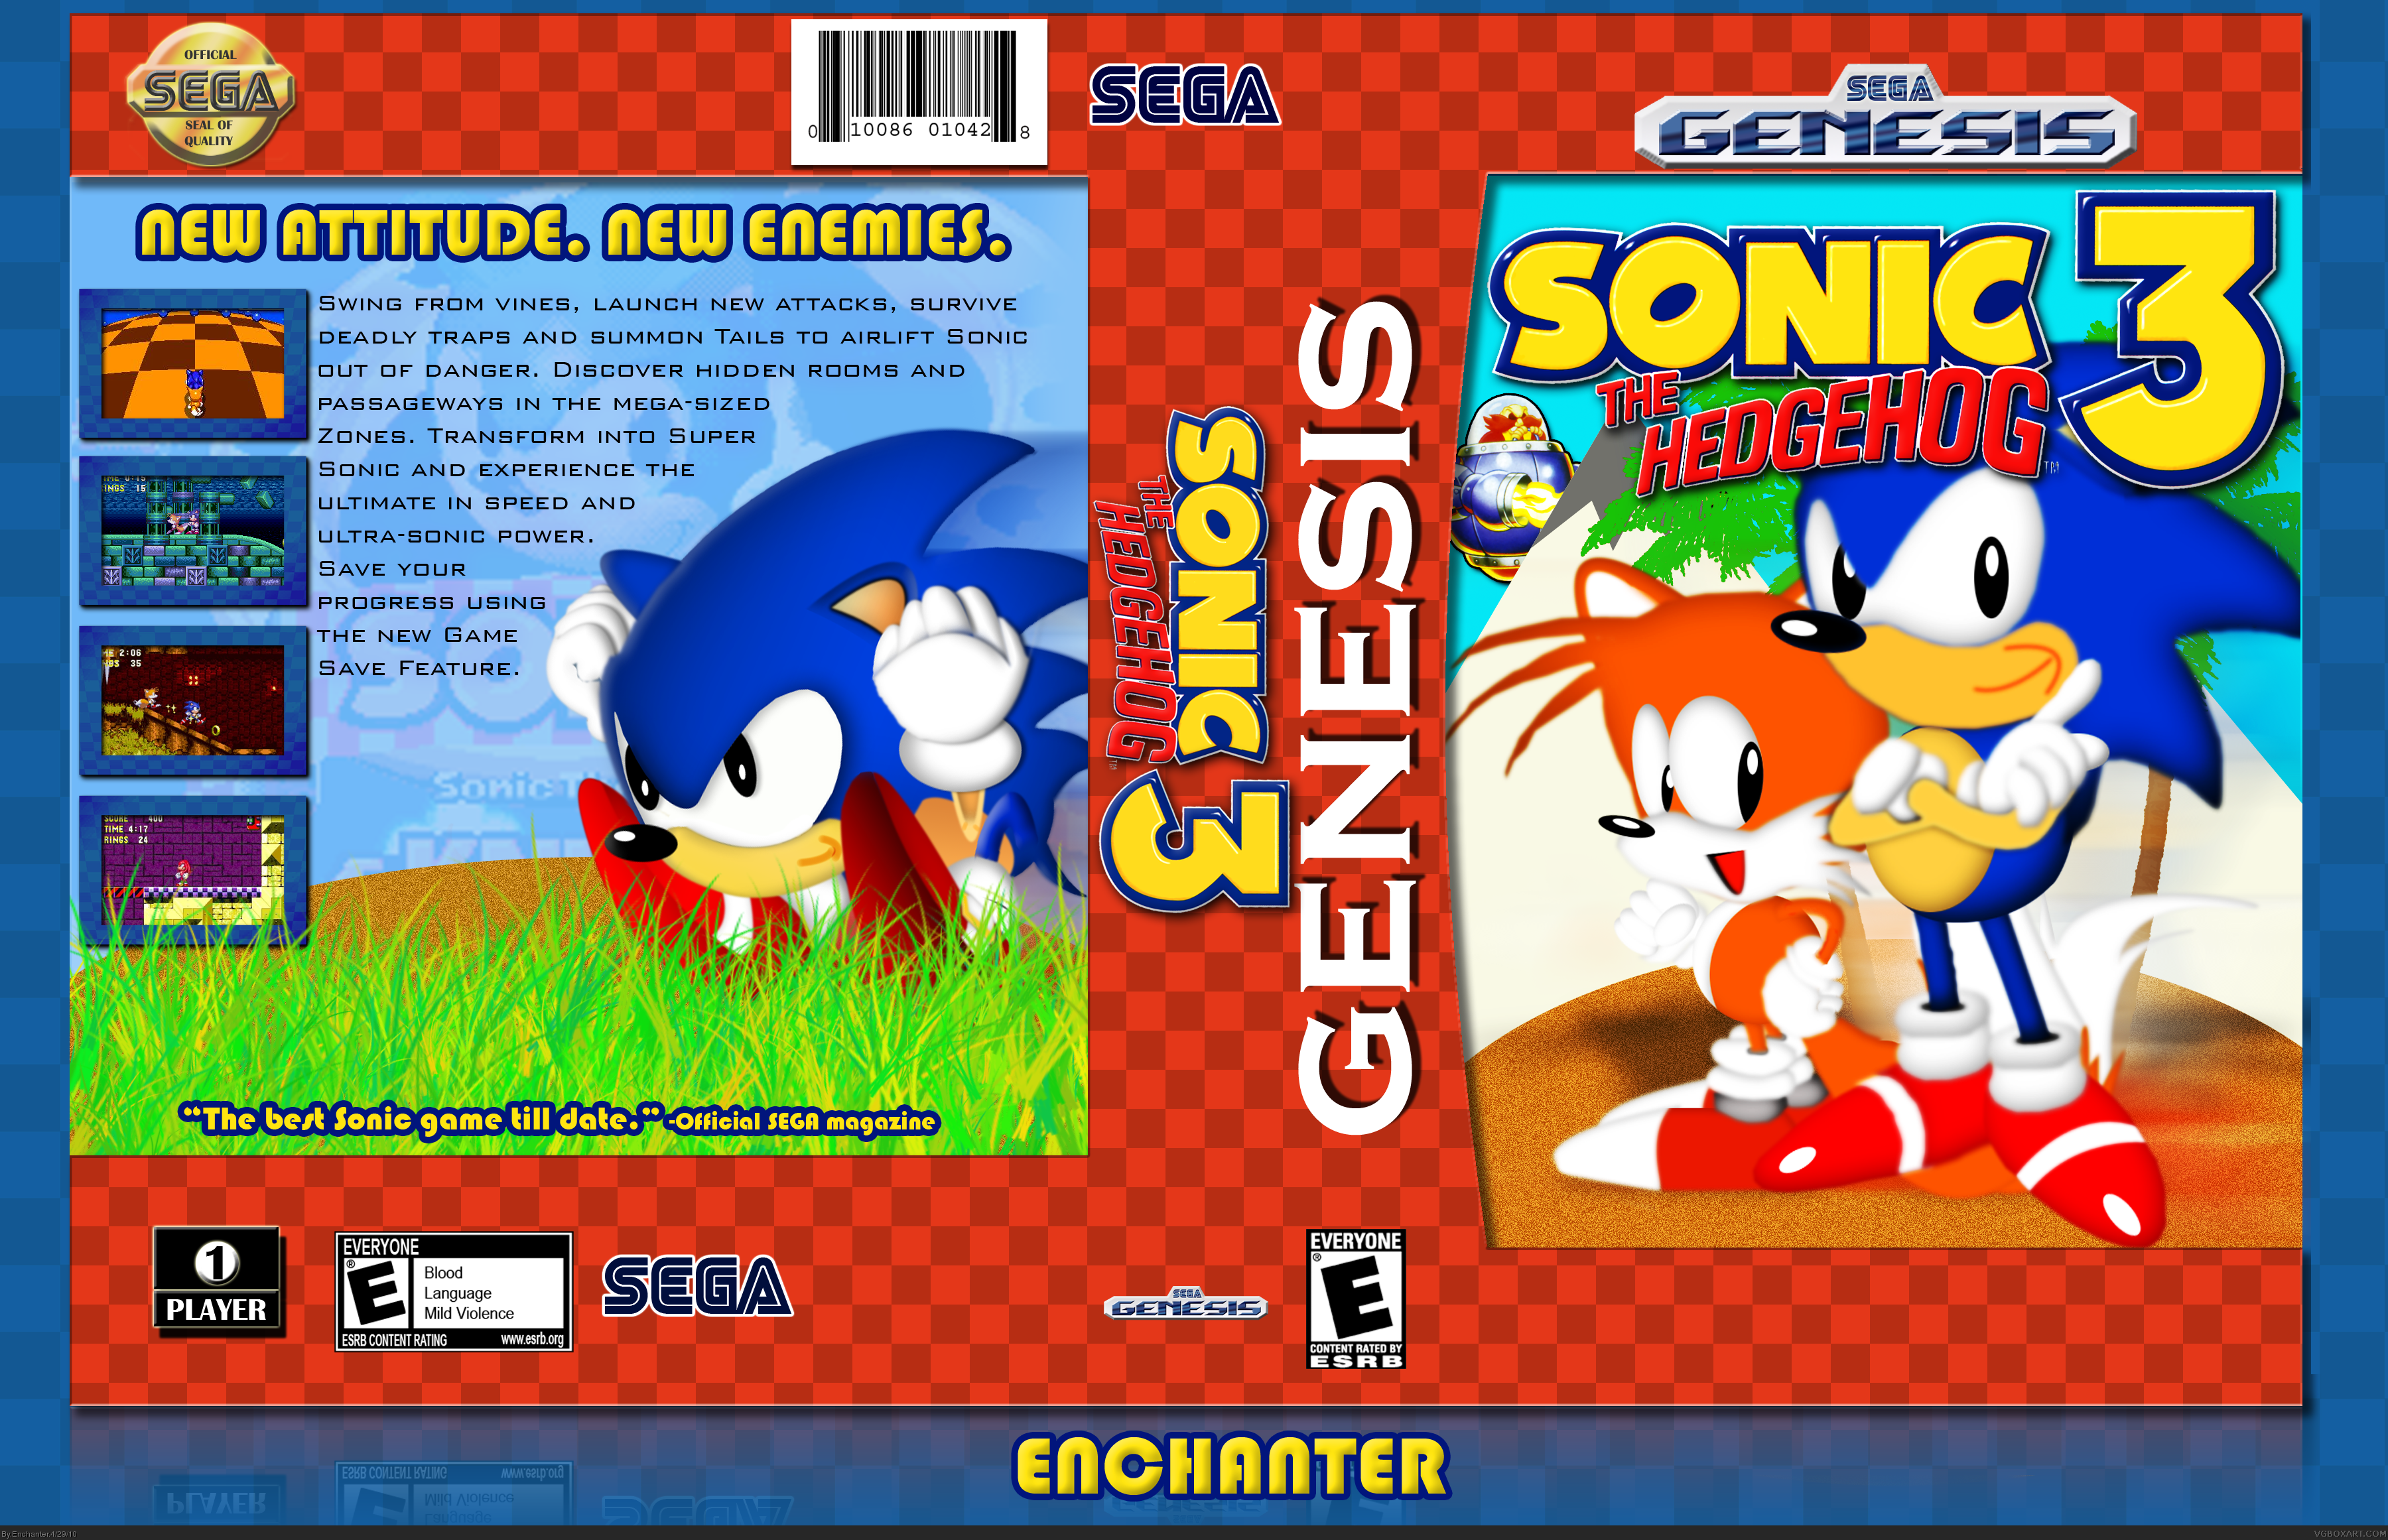 Sonic knuckles air. Sonic the Hedgehog 3 обложка. Sonic the Hedgehog 3 Sega Genesis. Sonic the Hedgehog 3 Sega обложка. Sonic 3 Sega обложка.